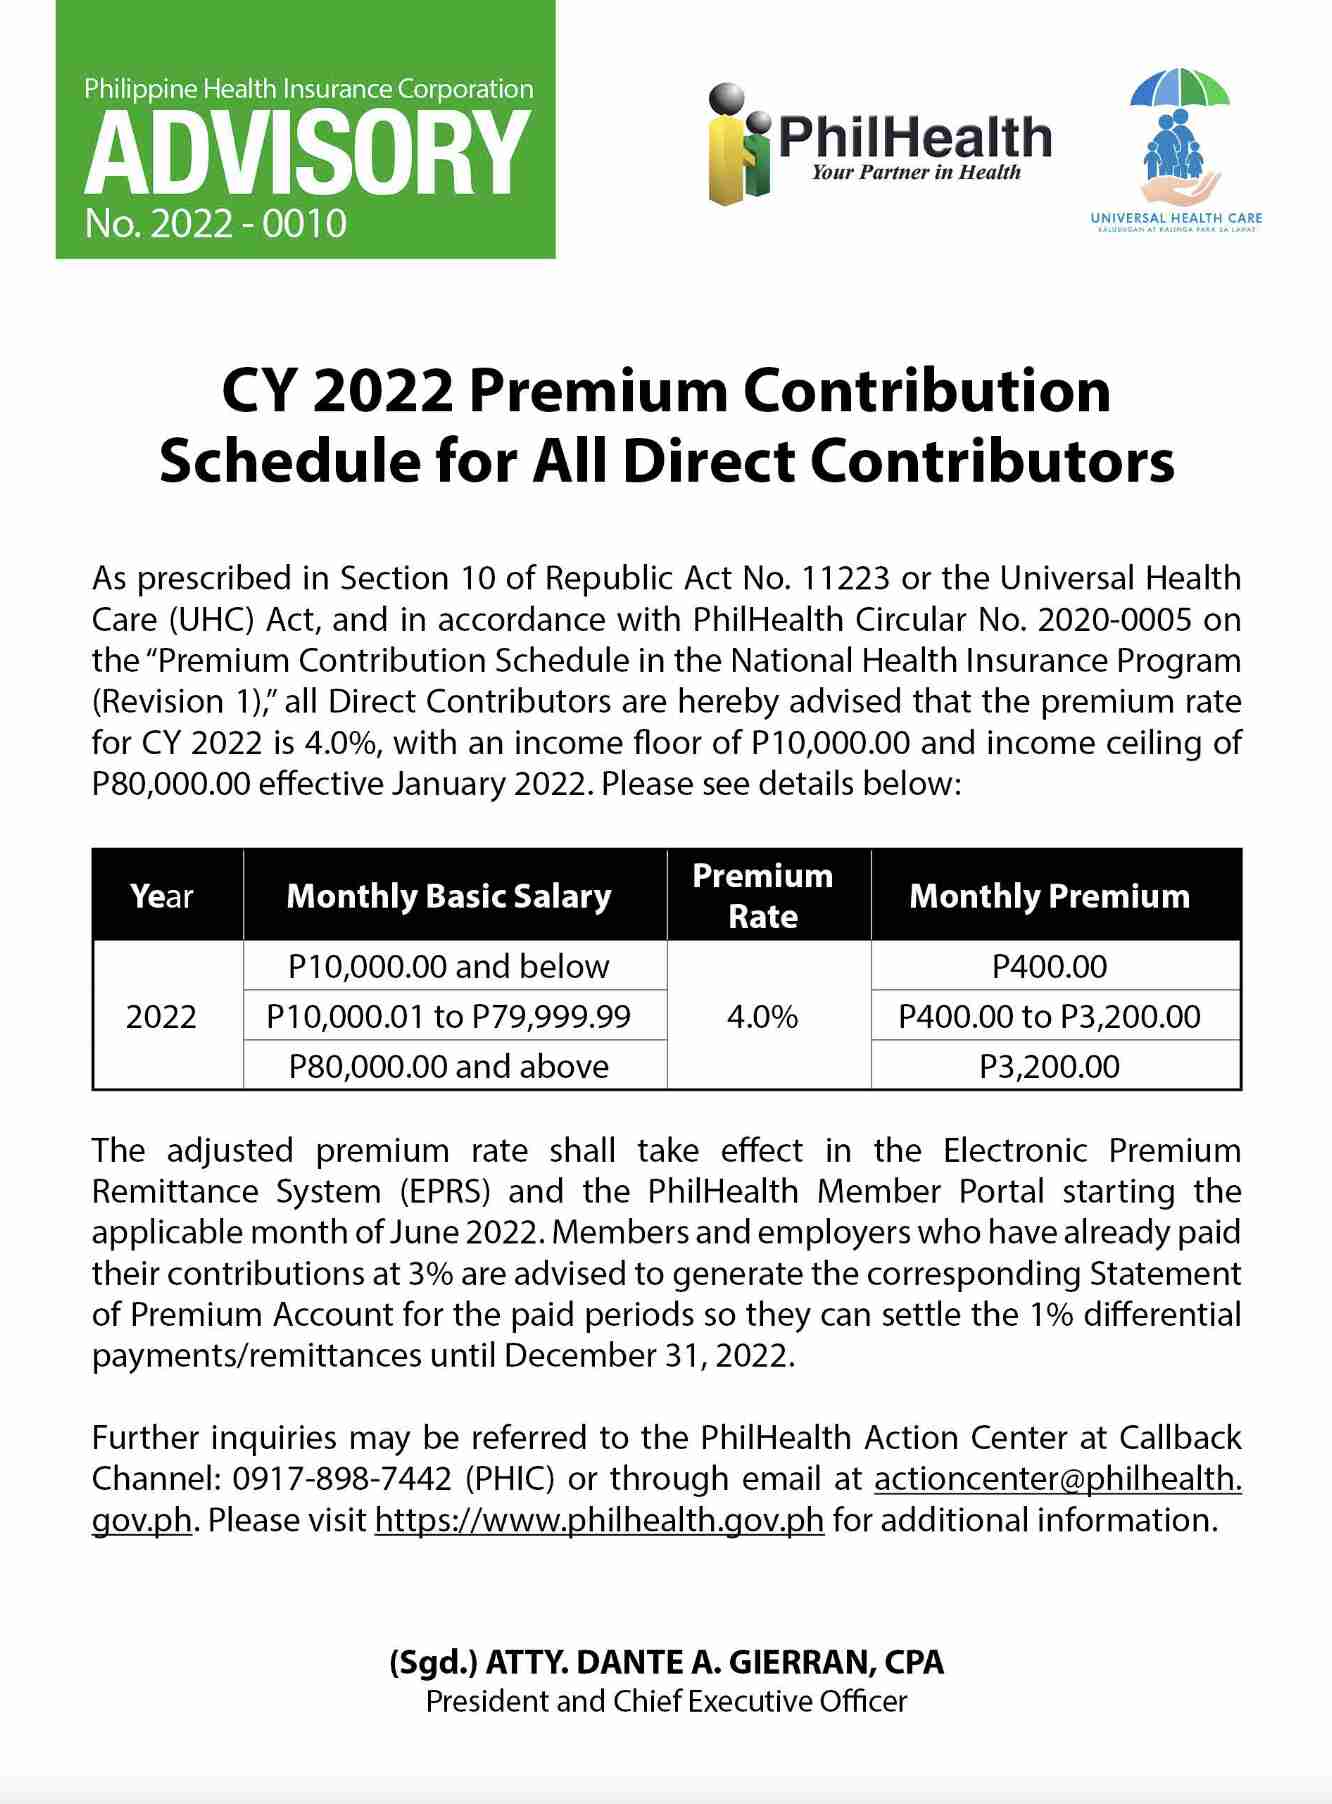 philhealth official statement about contributions 2022